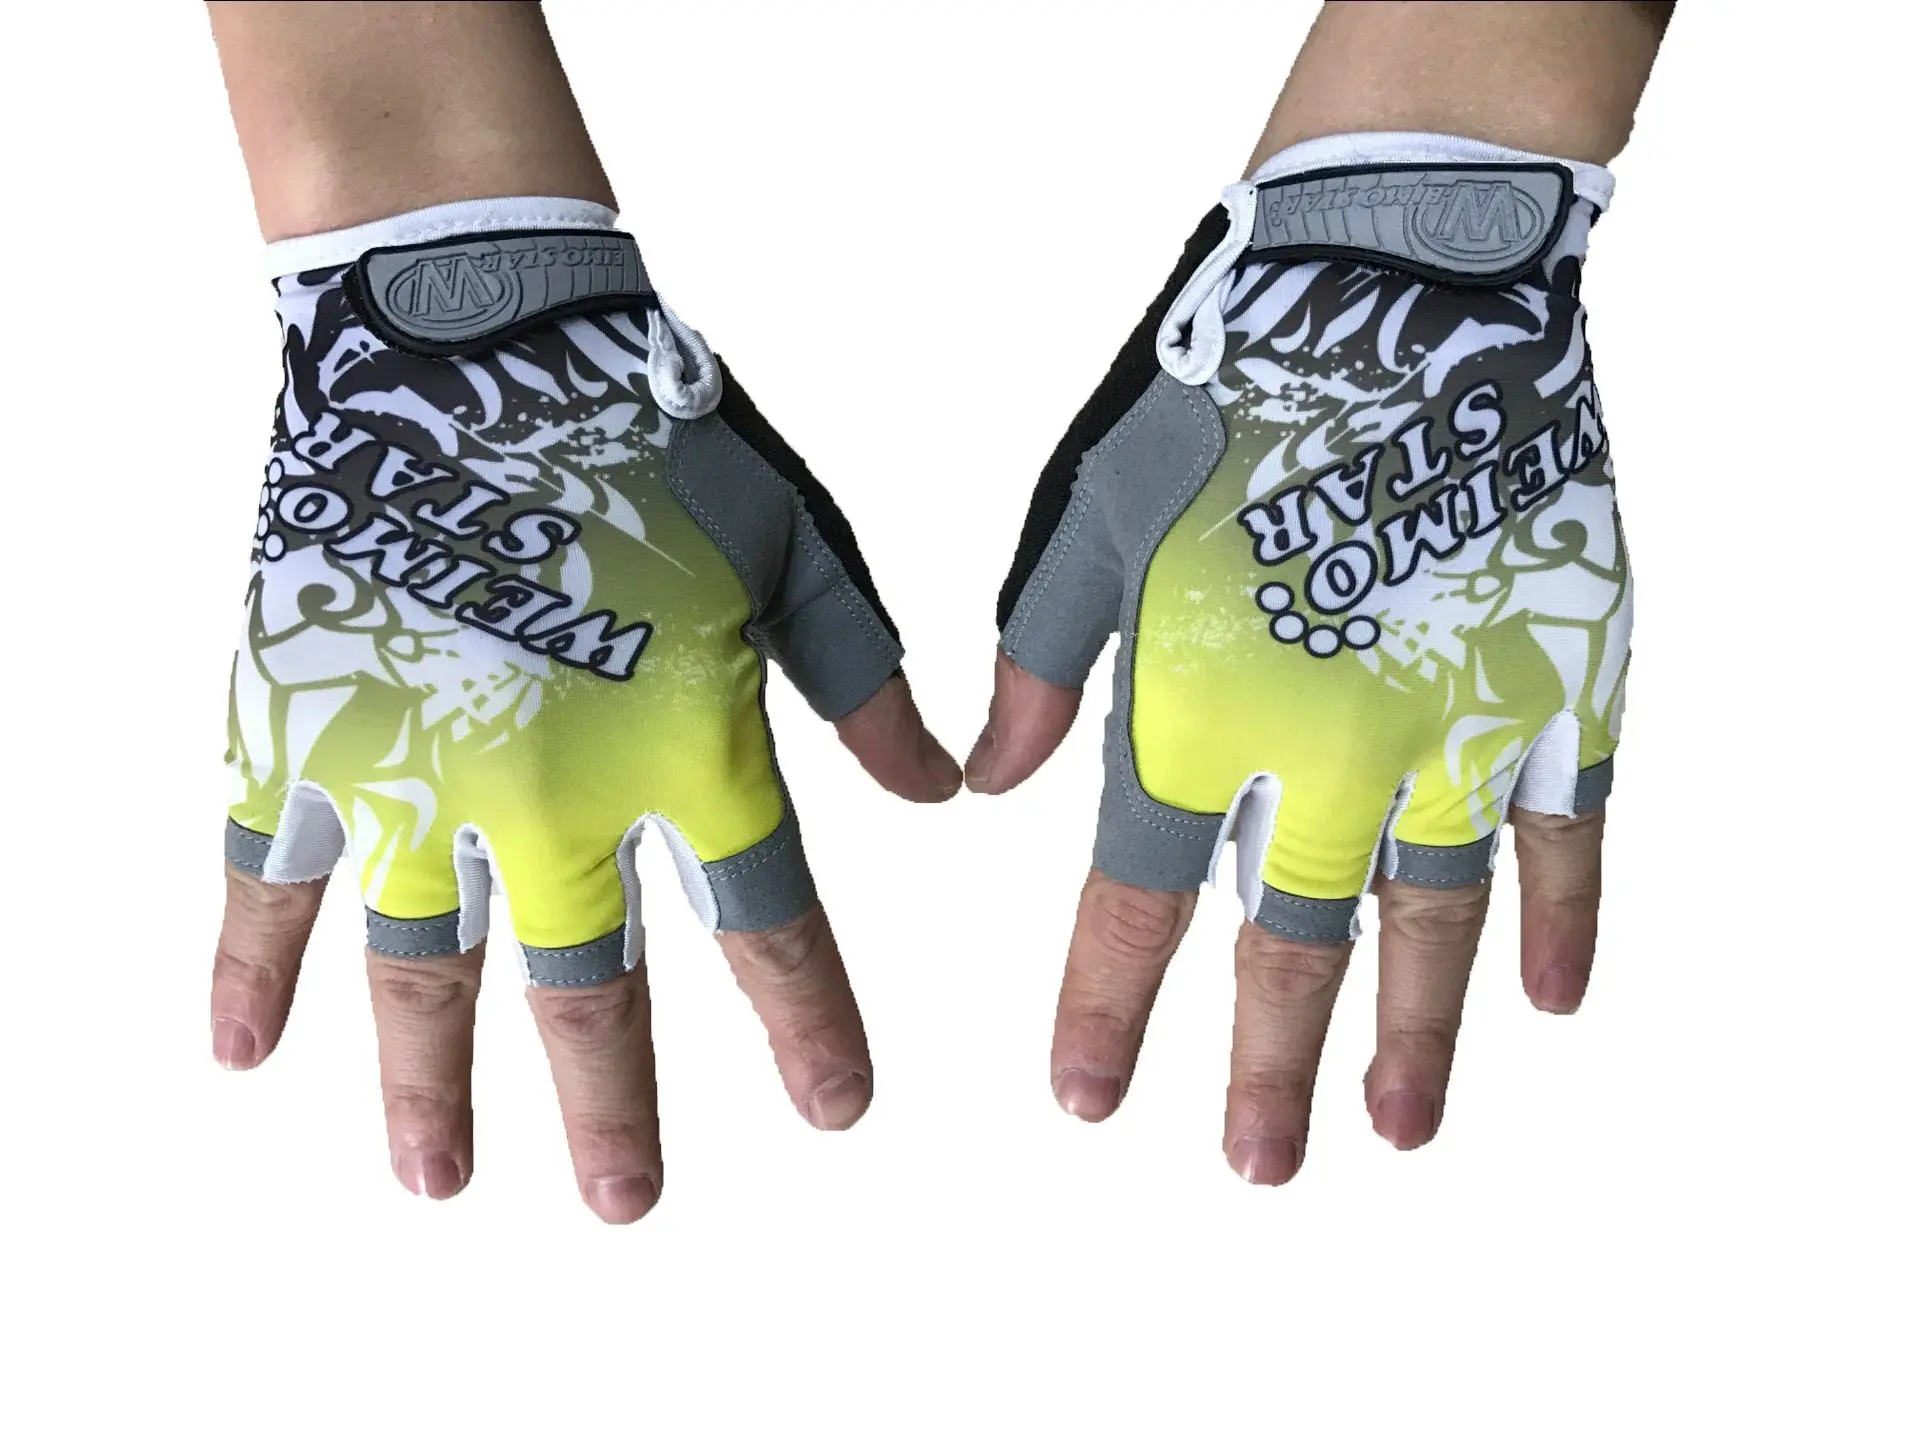 Men Women Full Finger Cycling Gloves Nylon Road Mountain Bike Bicycle MTB Downhill Riding Gloves gel pad Luva Ciclismo